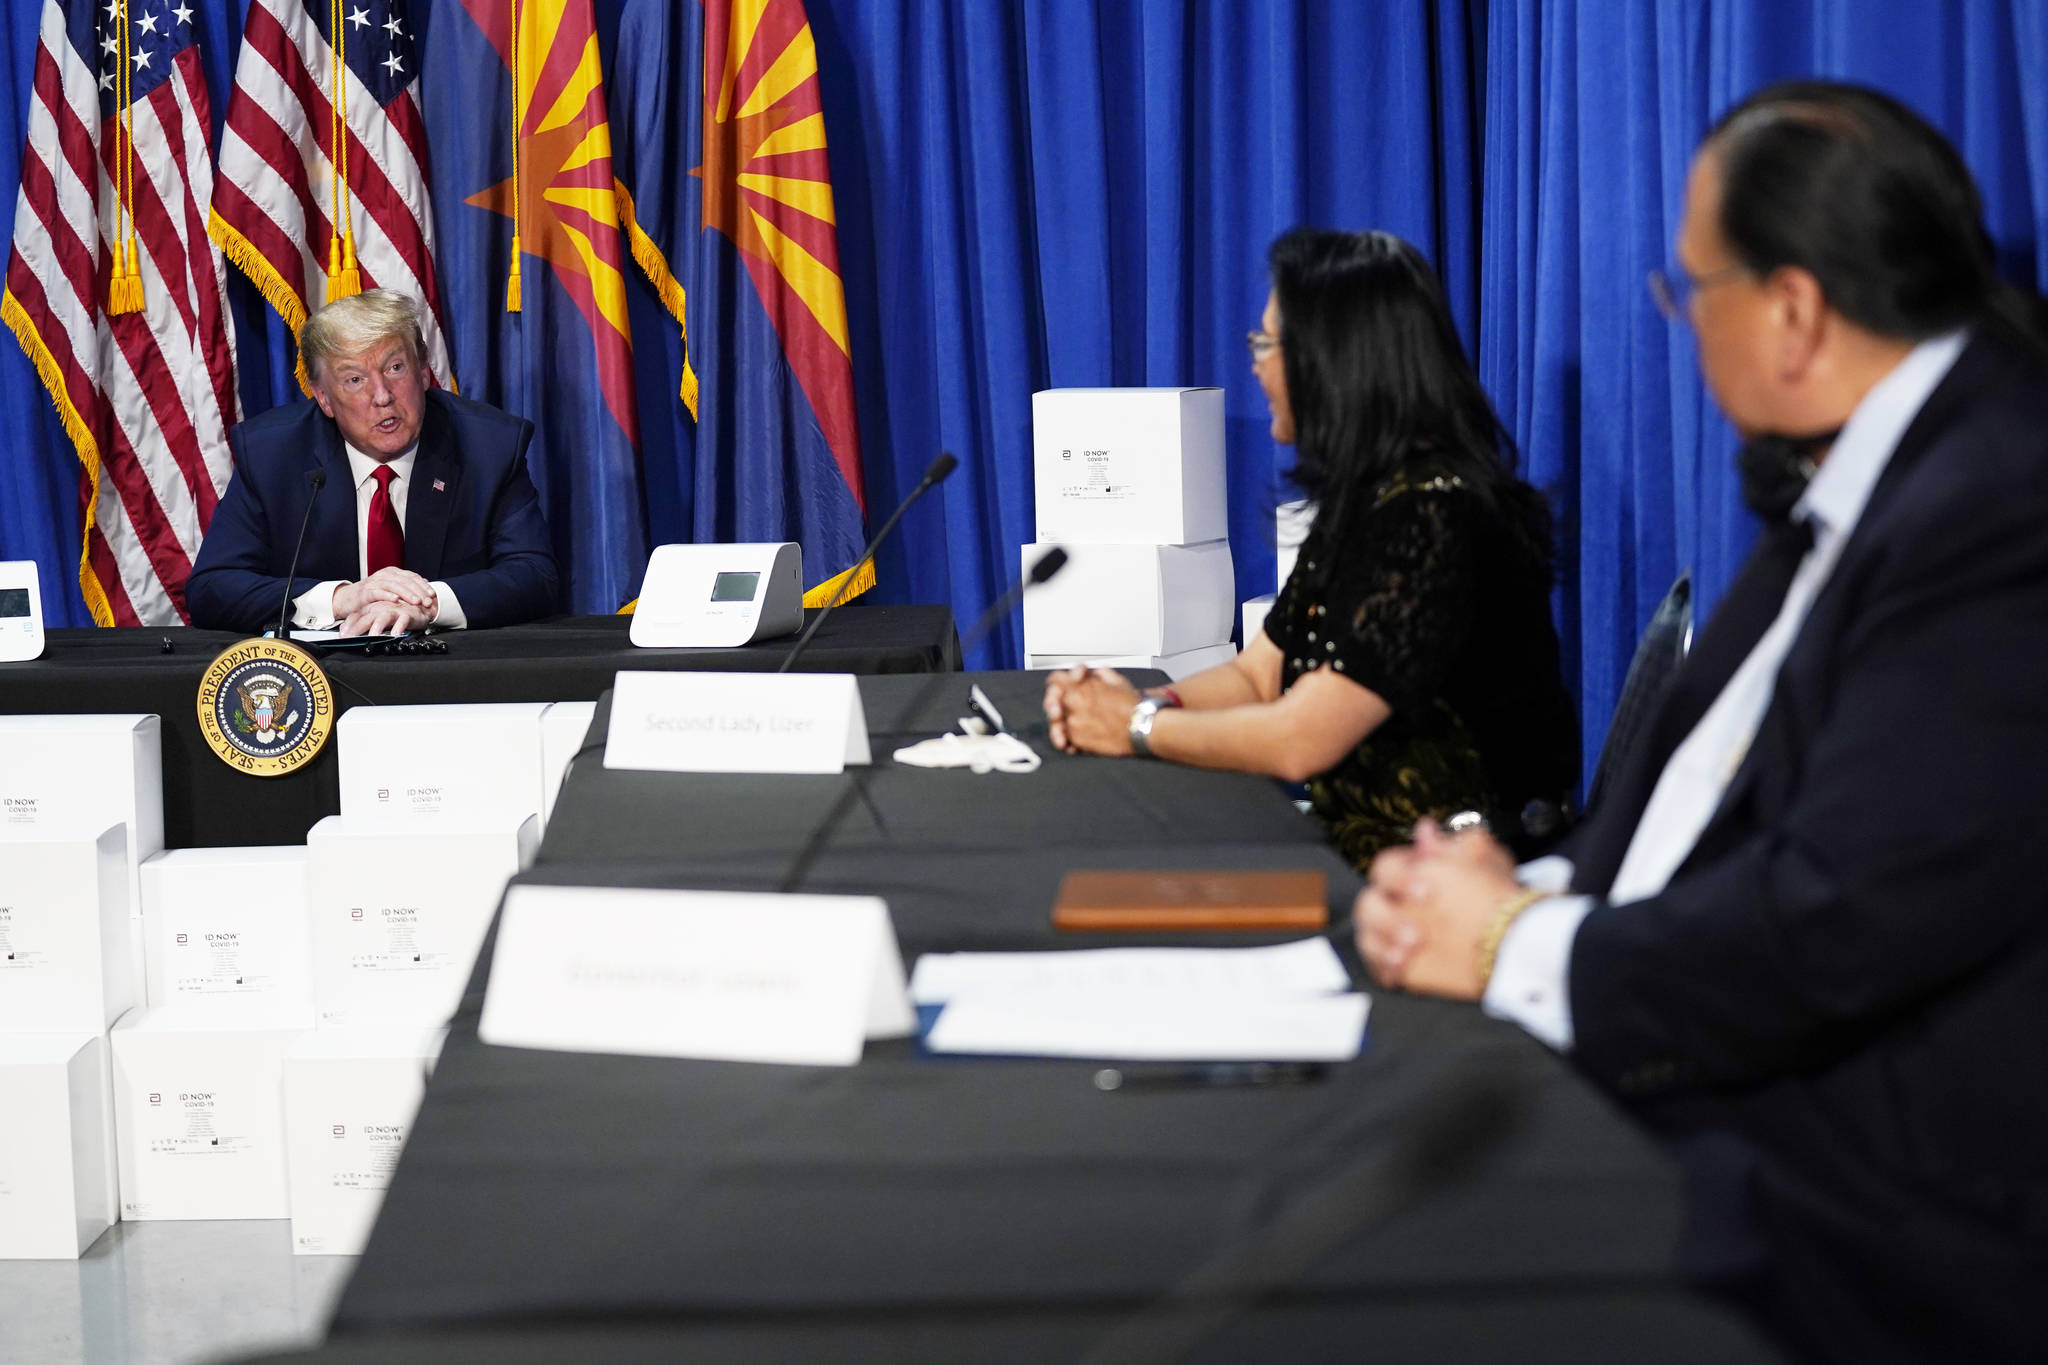 President Donald Trump speaks during a roundtable on supporting Native Americans, Tuesday, May 5, 2020, in Phoenix. (AP Photo/Evan Vucci)